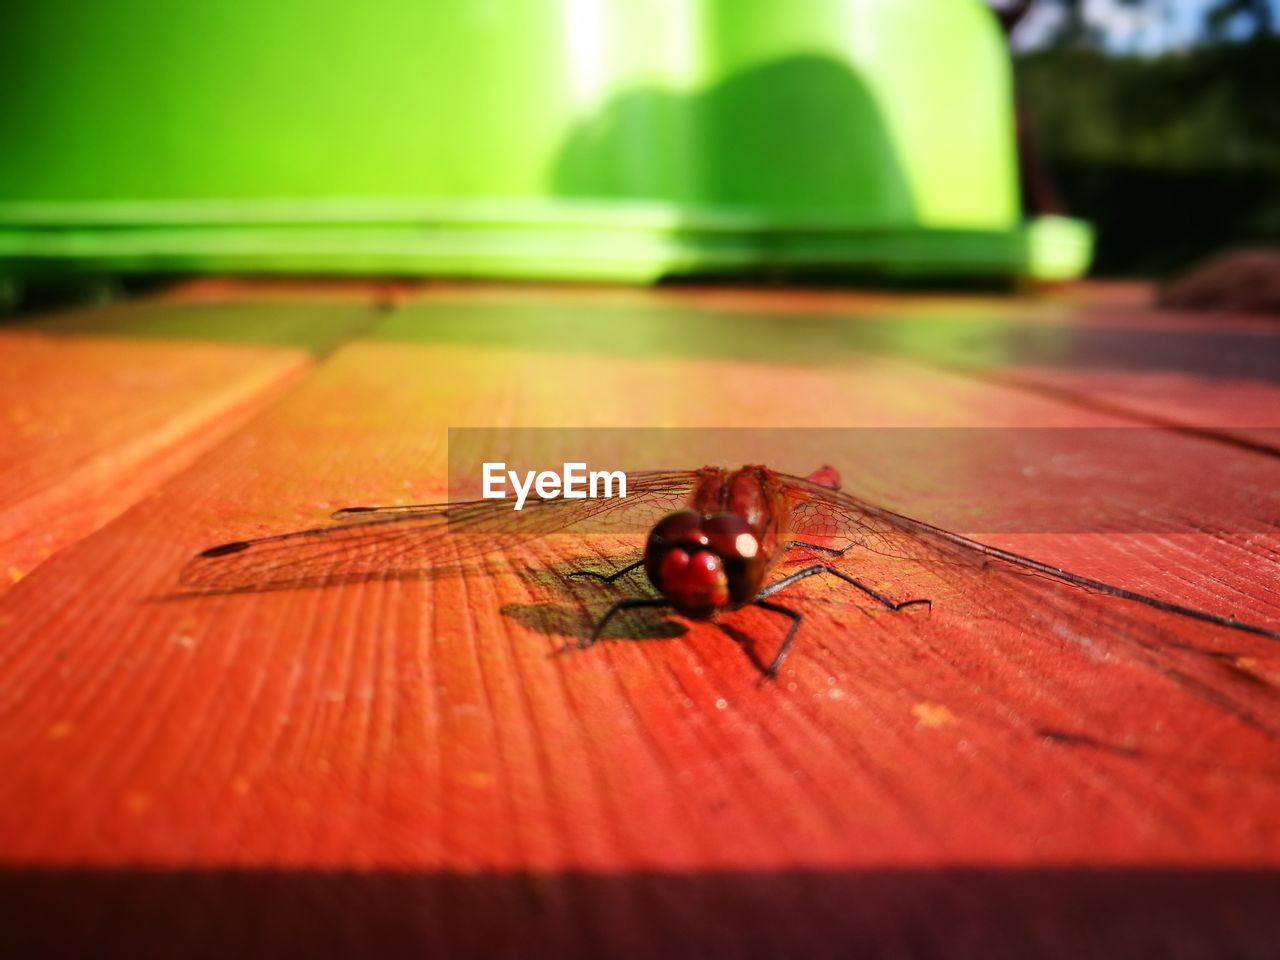 CLOSE-UP OF BUG ON TABLE